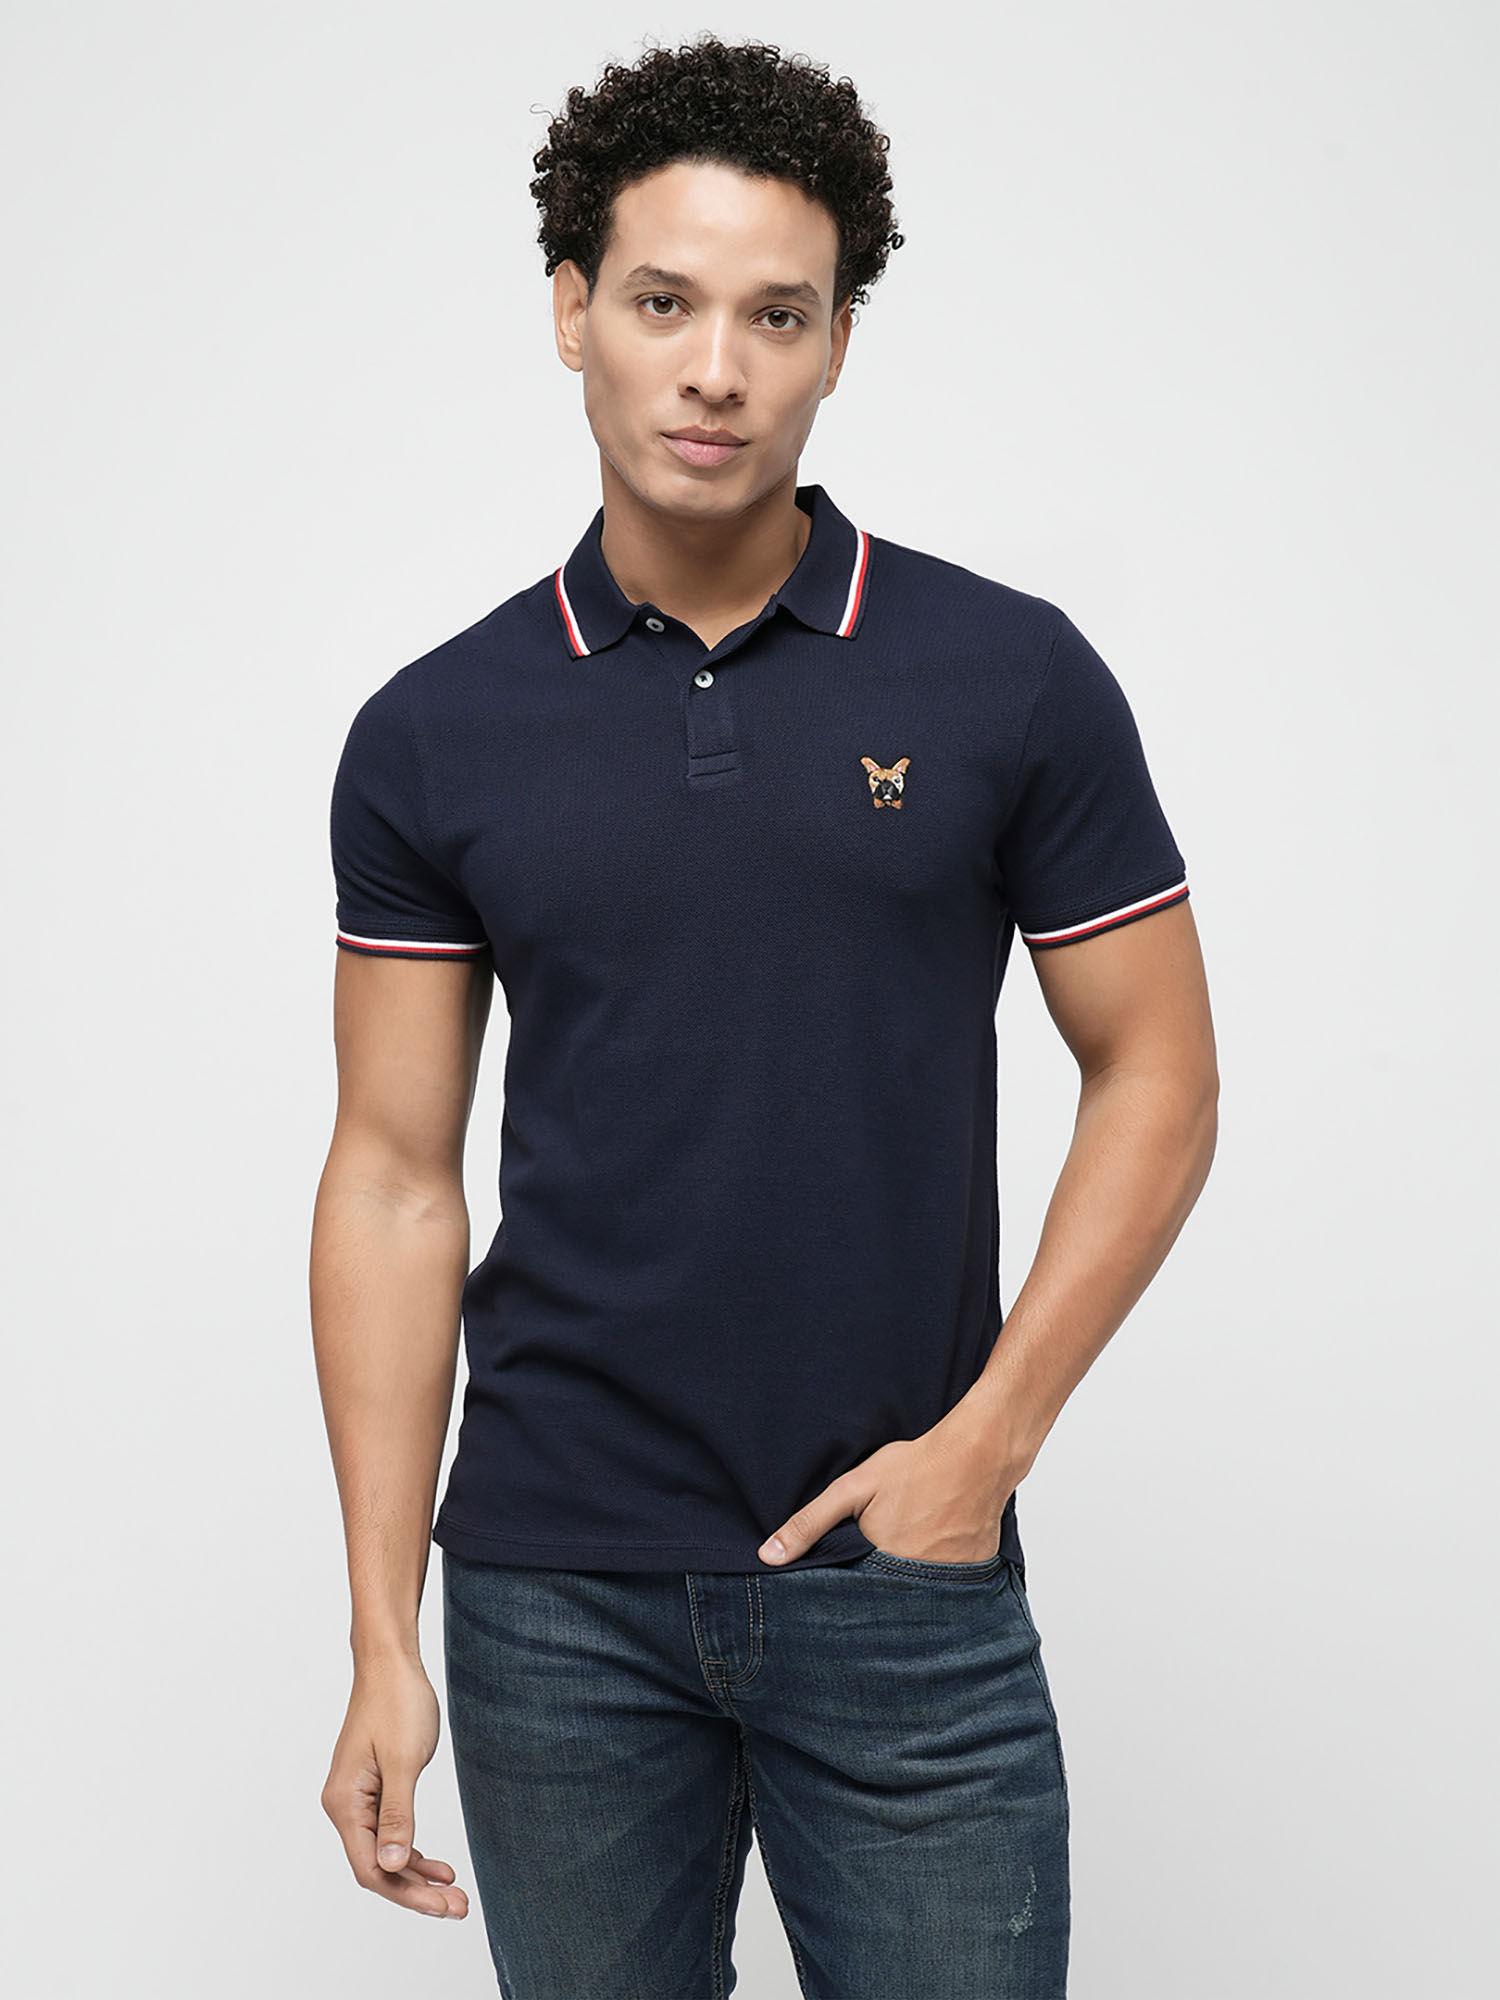 Solid Navy Blue Slim Fit Polo T-Shirt